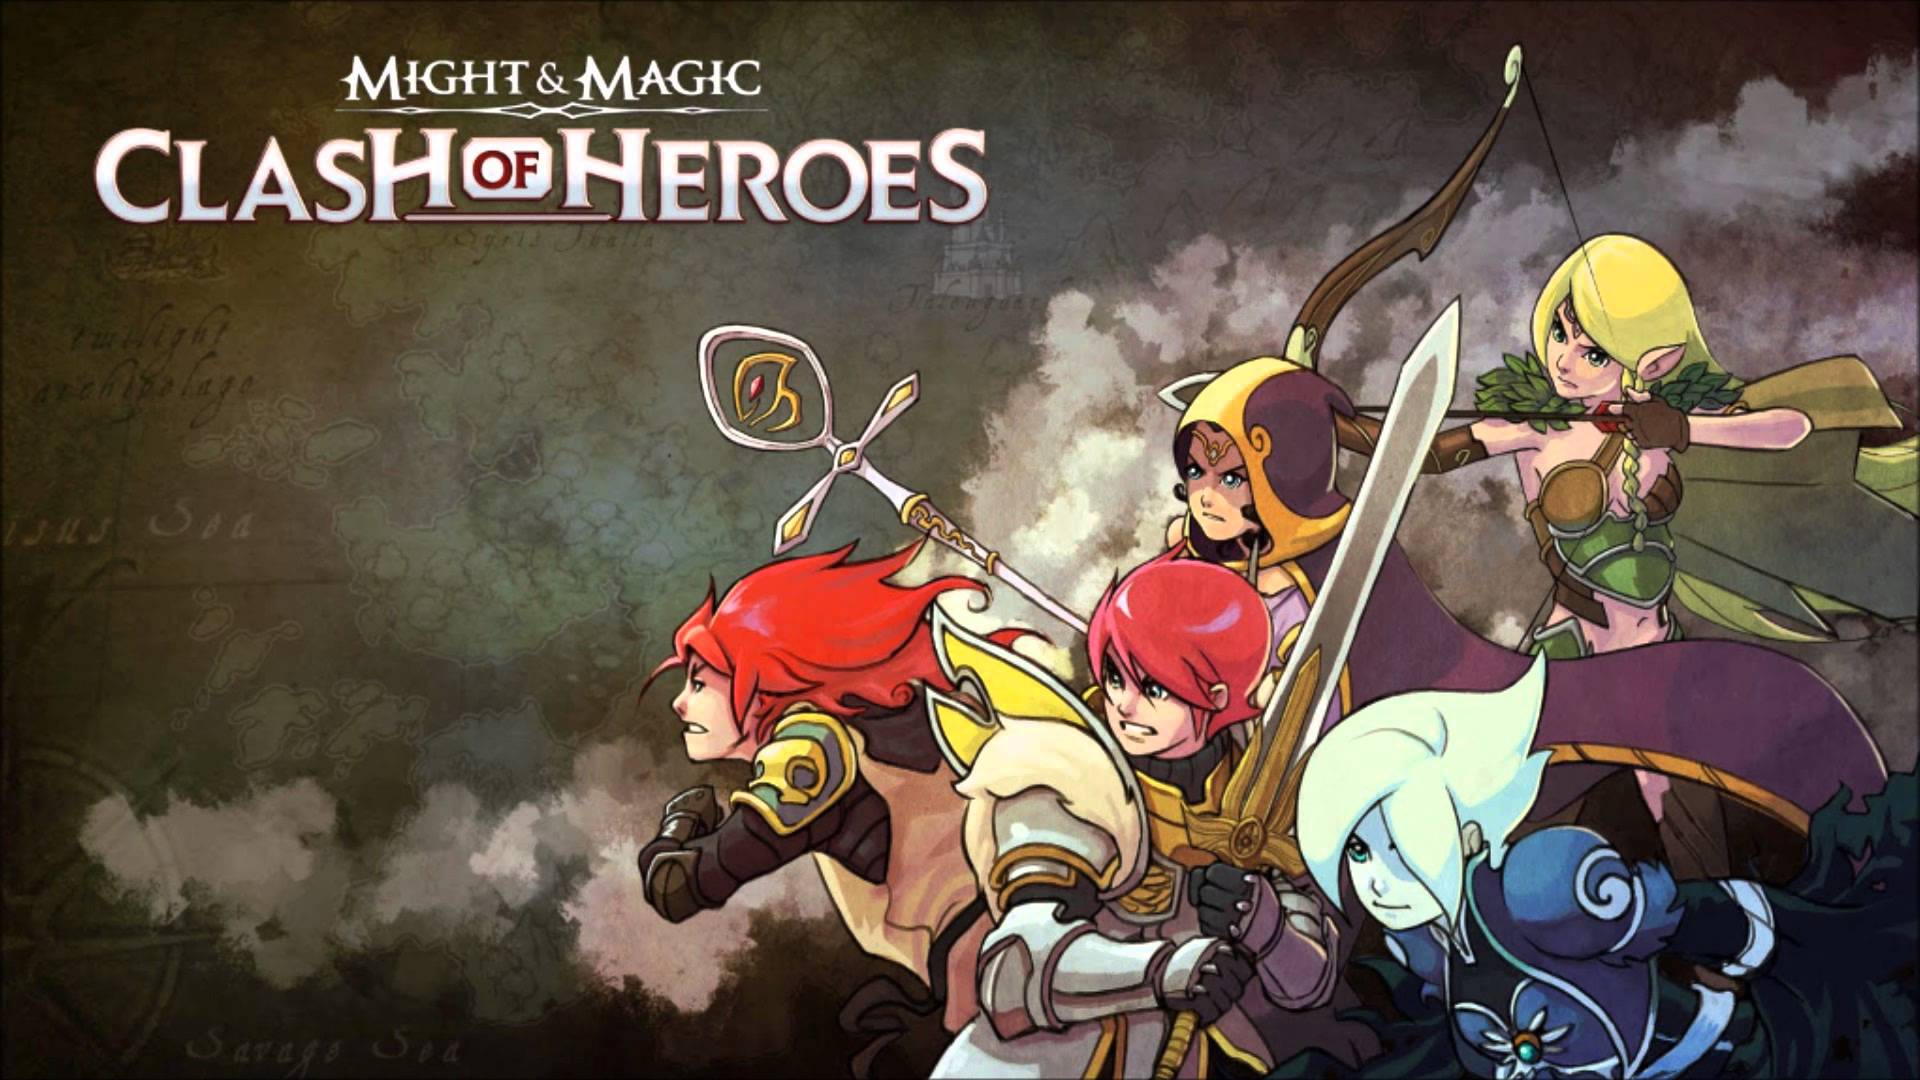 Might And Magic: Clash Of Heroes HD wallpapers, Desktop wallpaper - most viewed